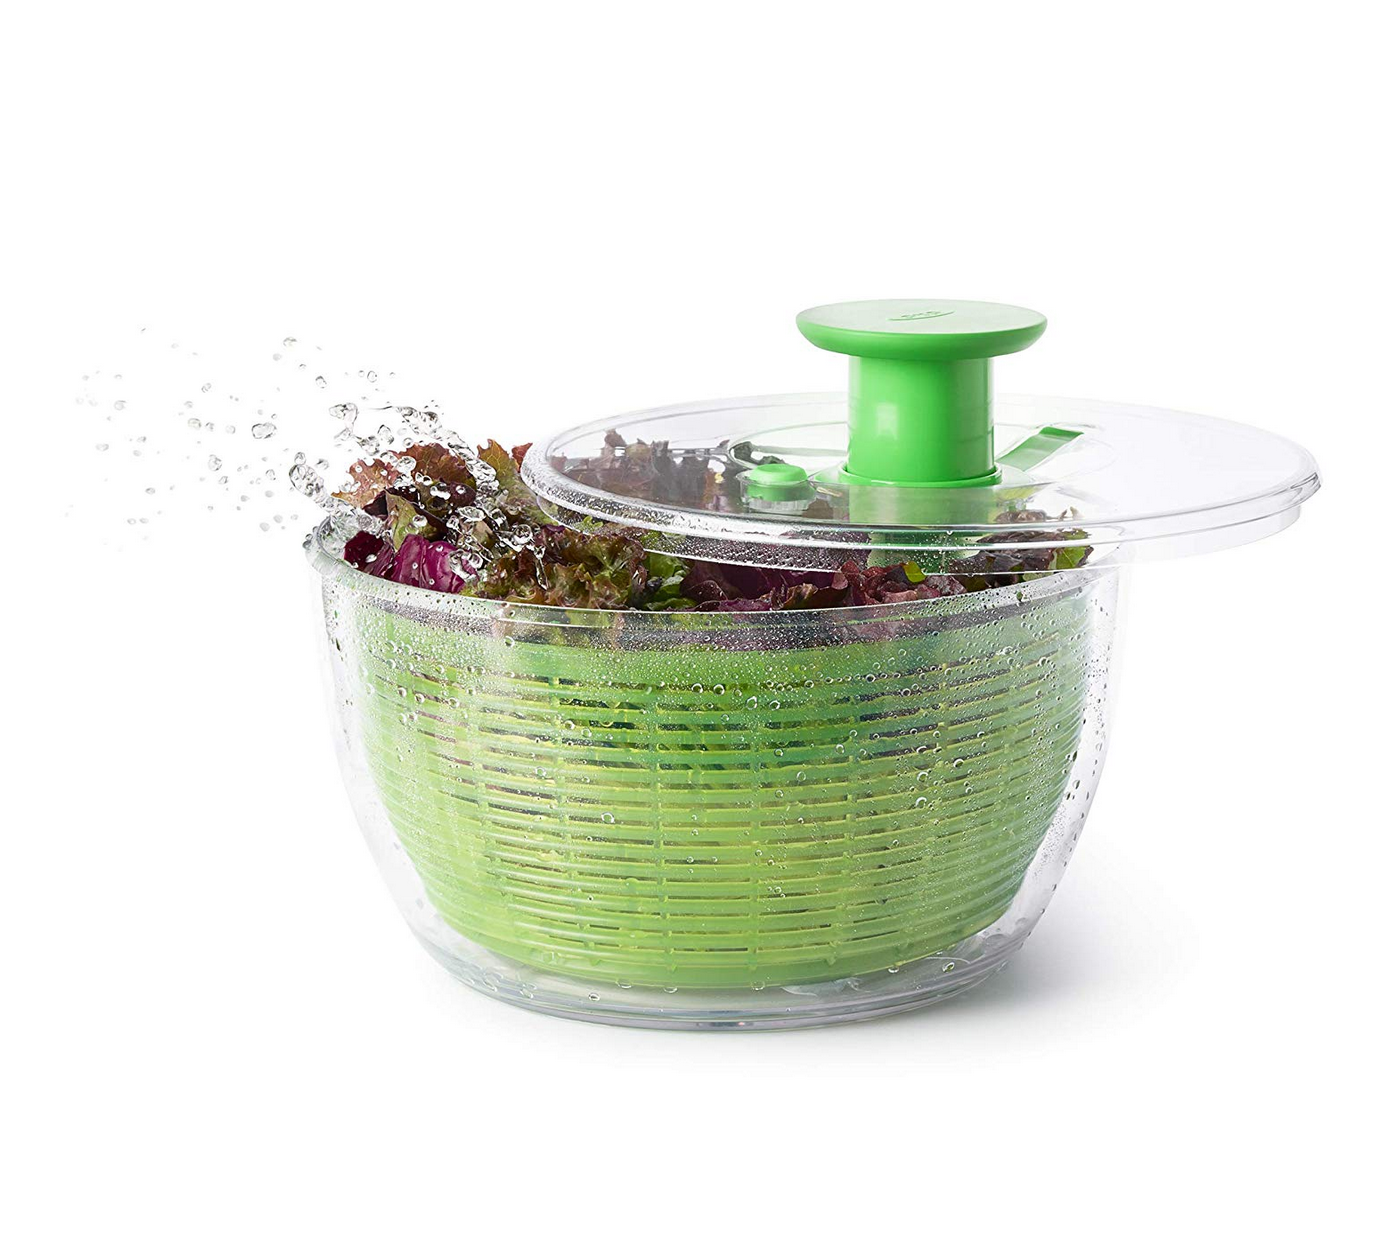 OXO Good Grips 10 In. Diameter Salad Spinner - Power Townsend Company